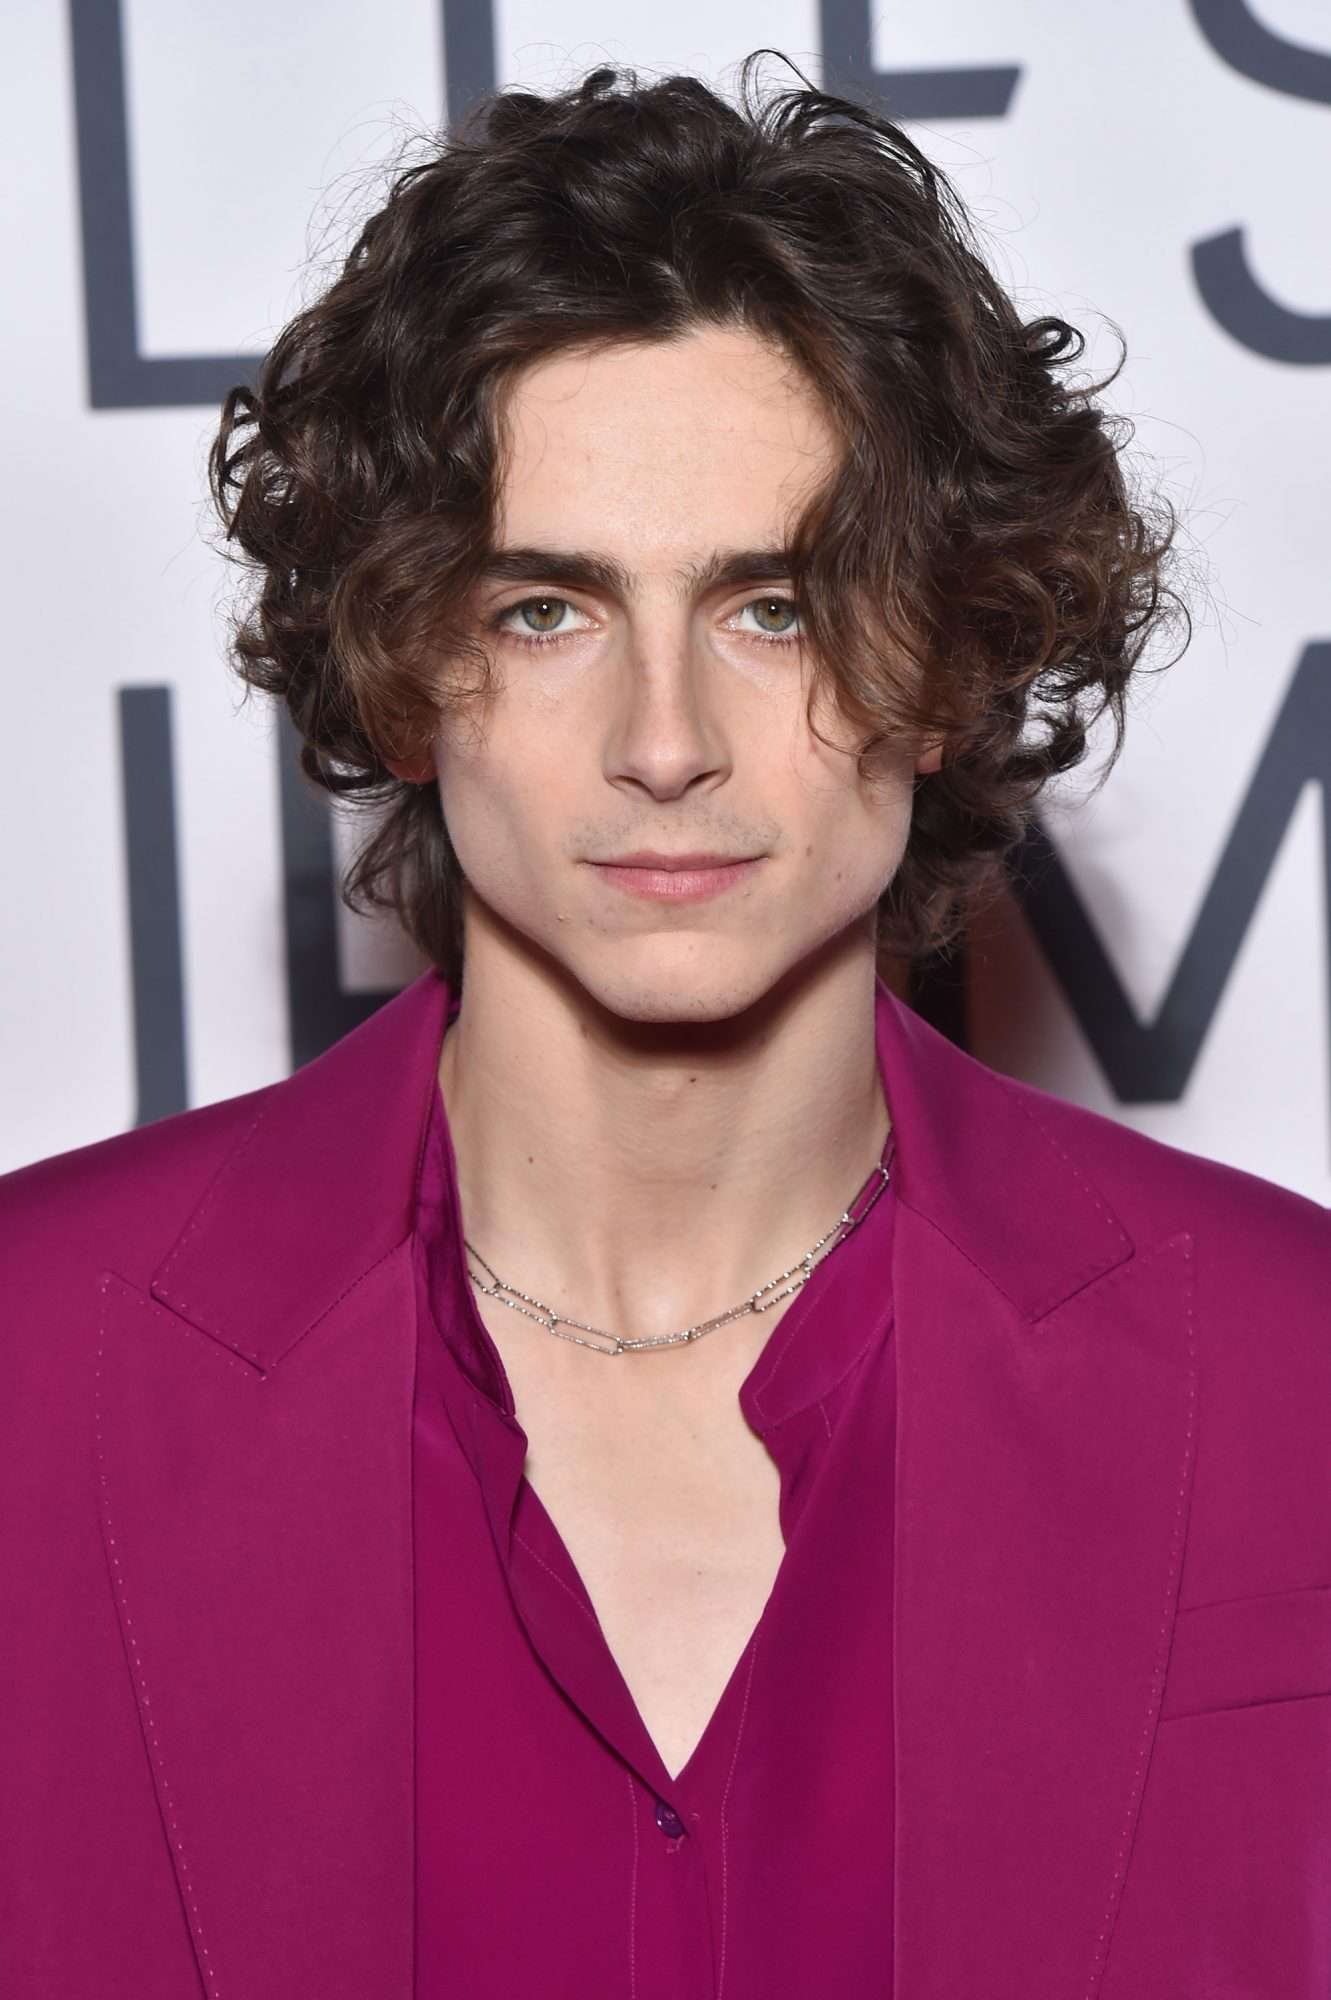 Timothée Chalamet Age, Biography, Height, Place of Birth, News & Photos